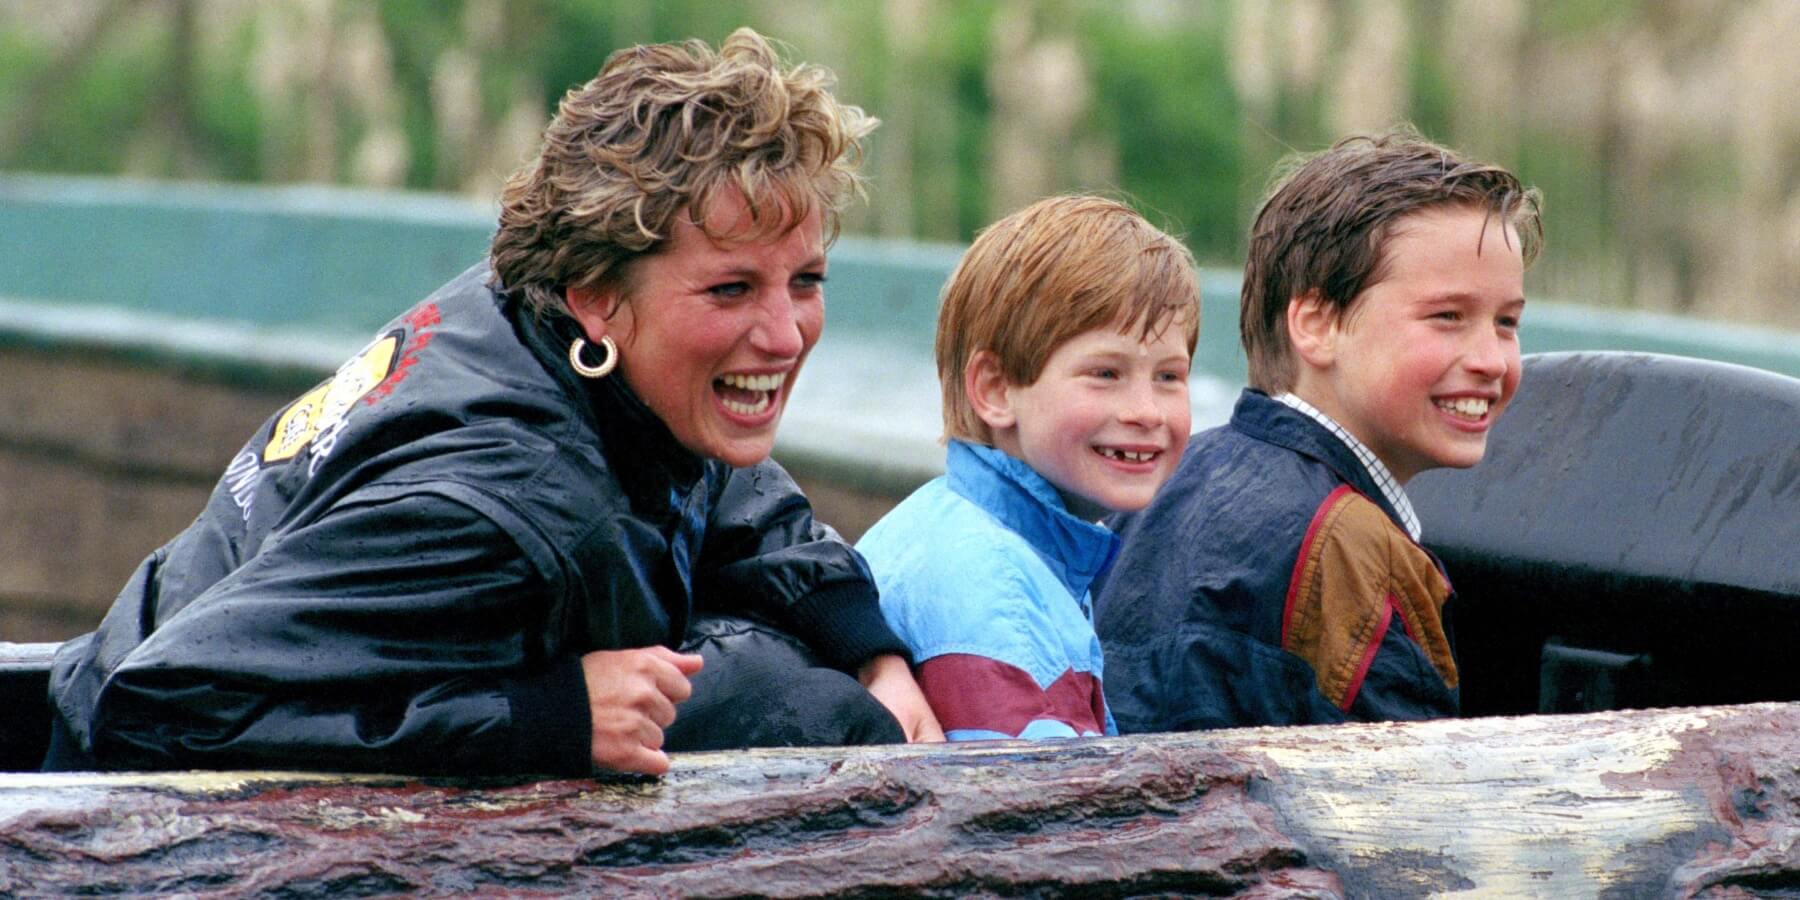 Princess Diana, Prince Harry and Prince William photographed in the early 1990s at an amusement park